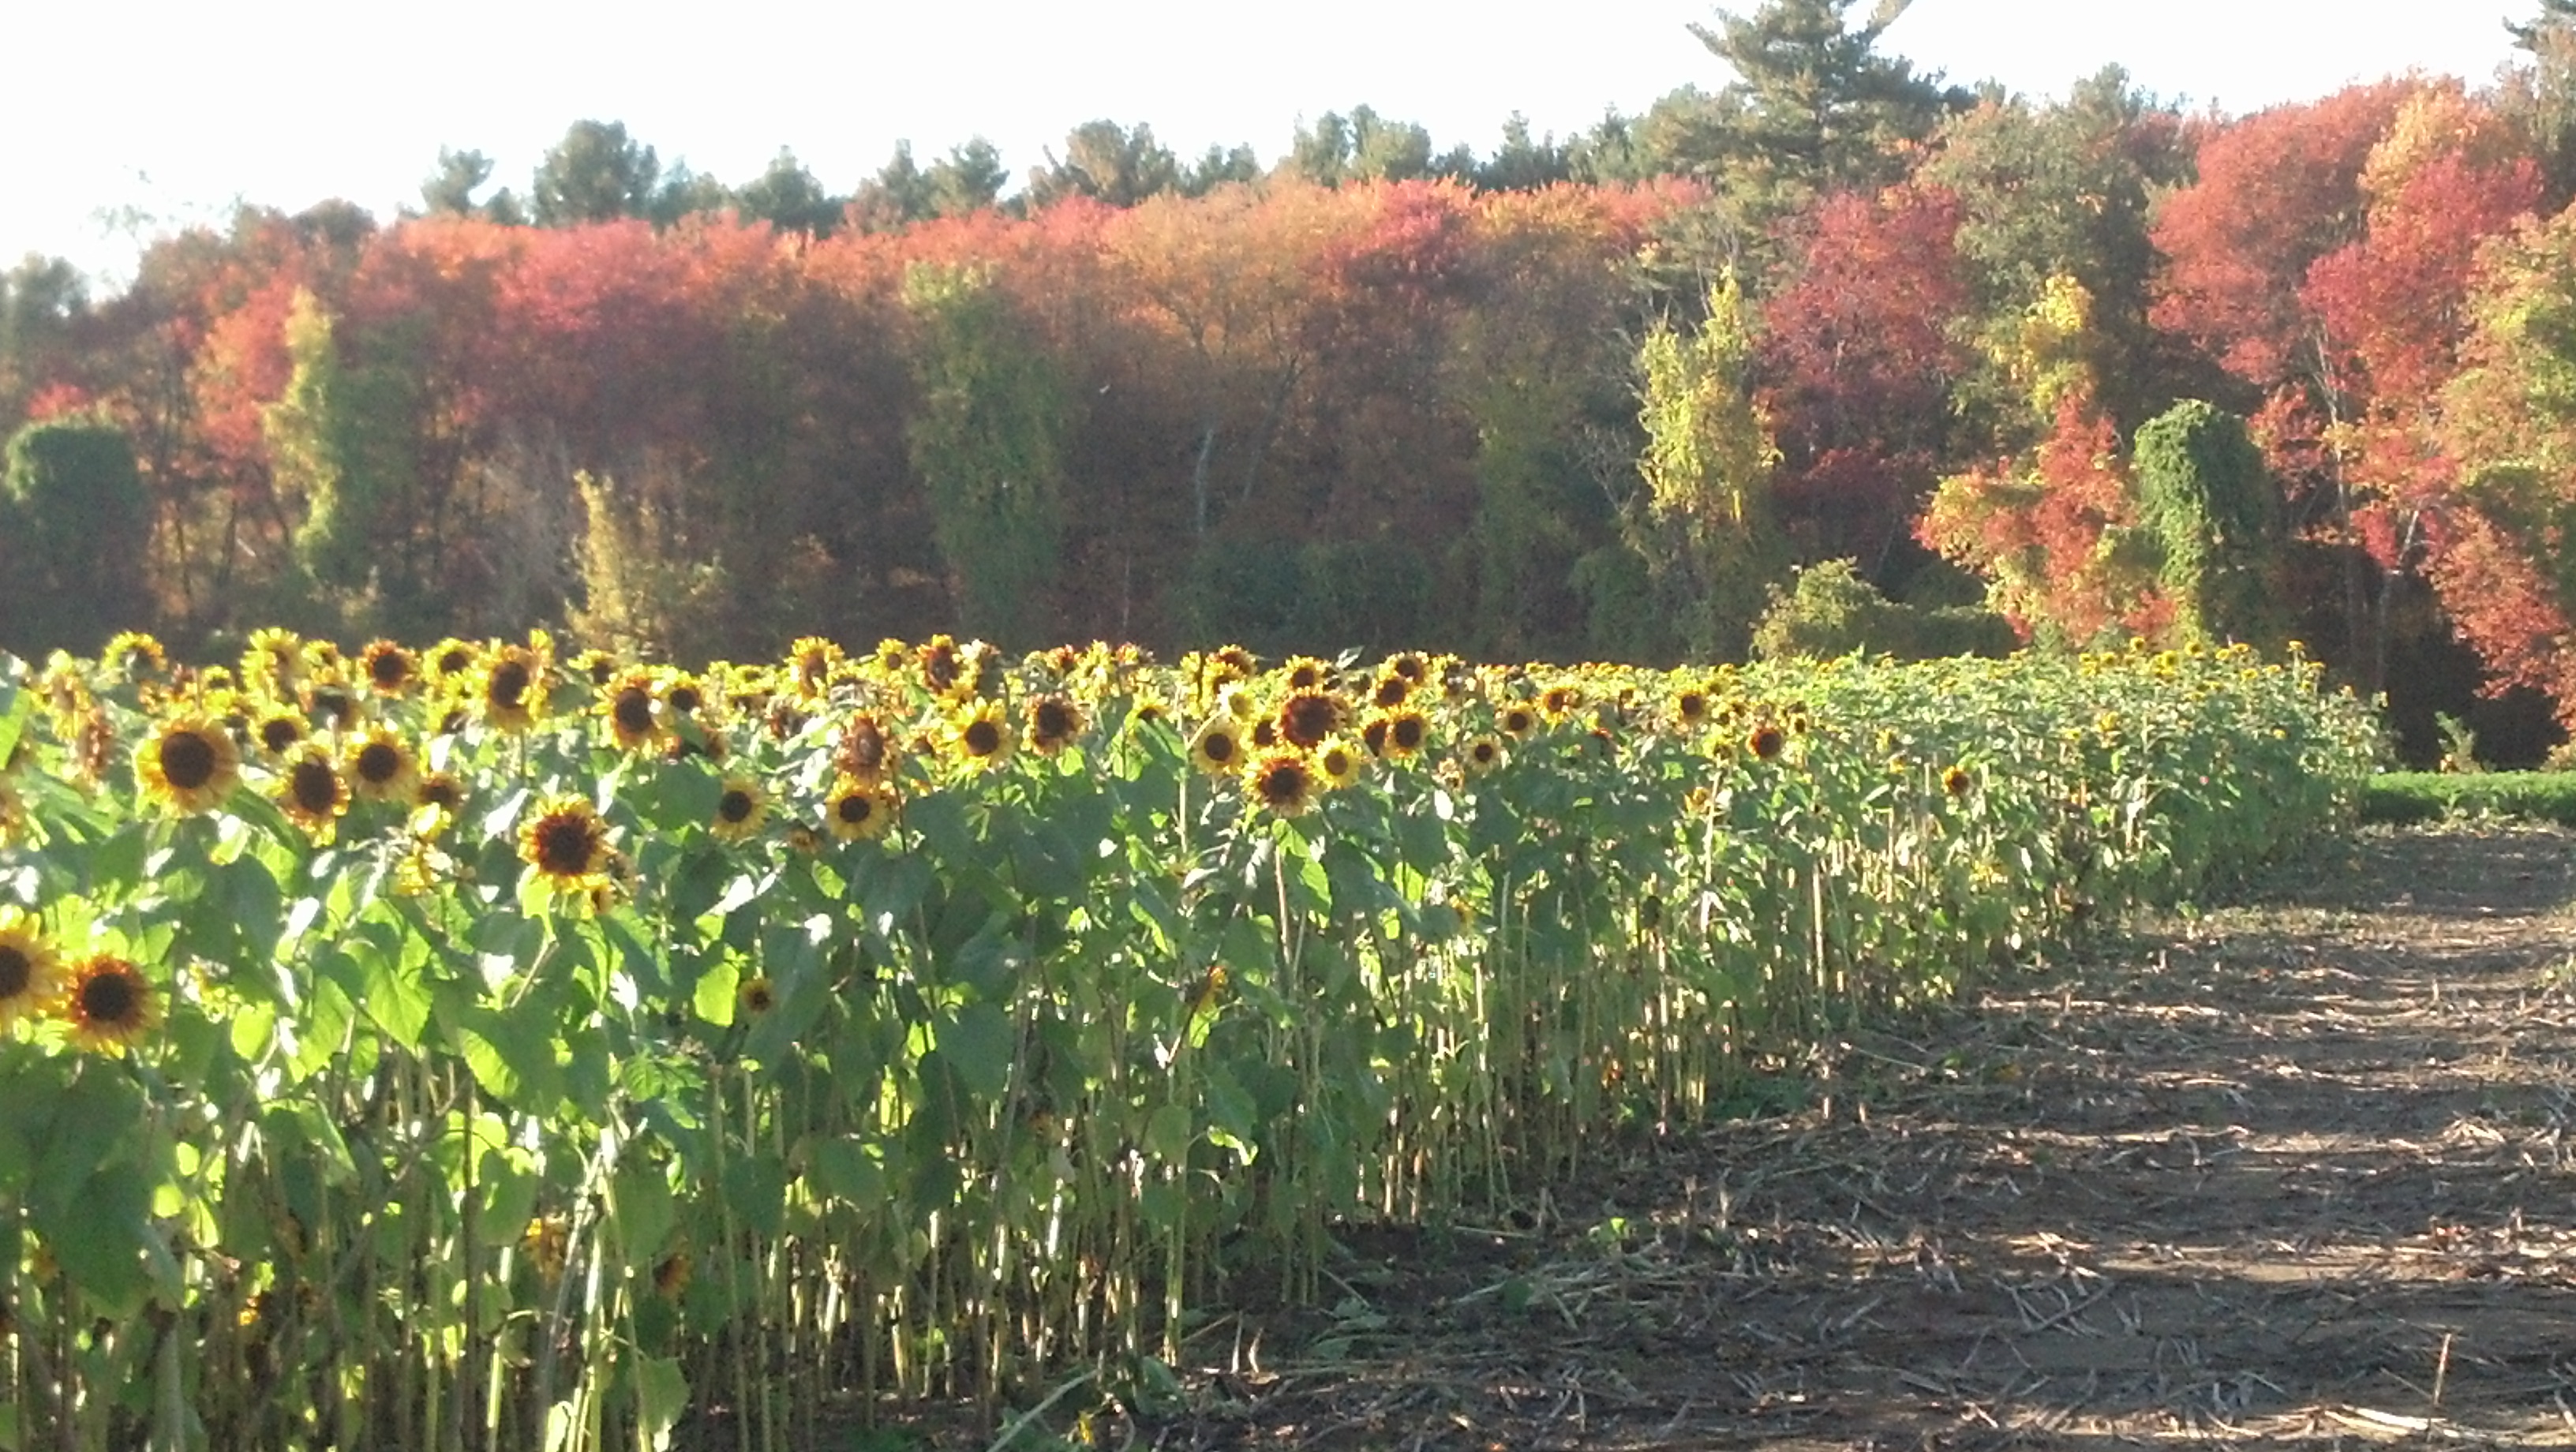 Sunflowers and Autumn Trees